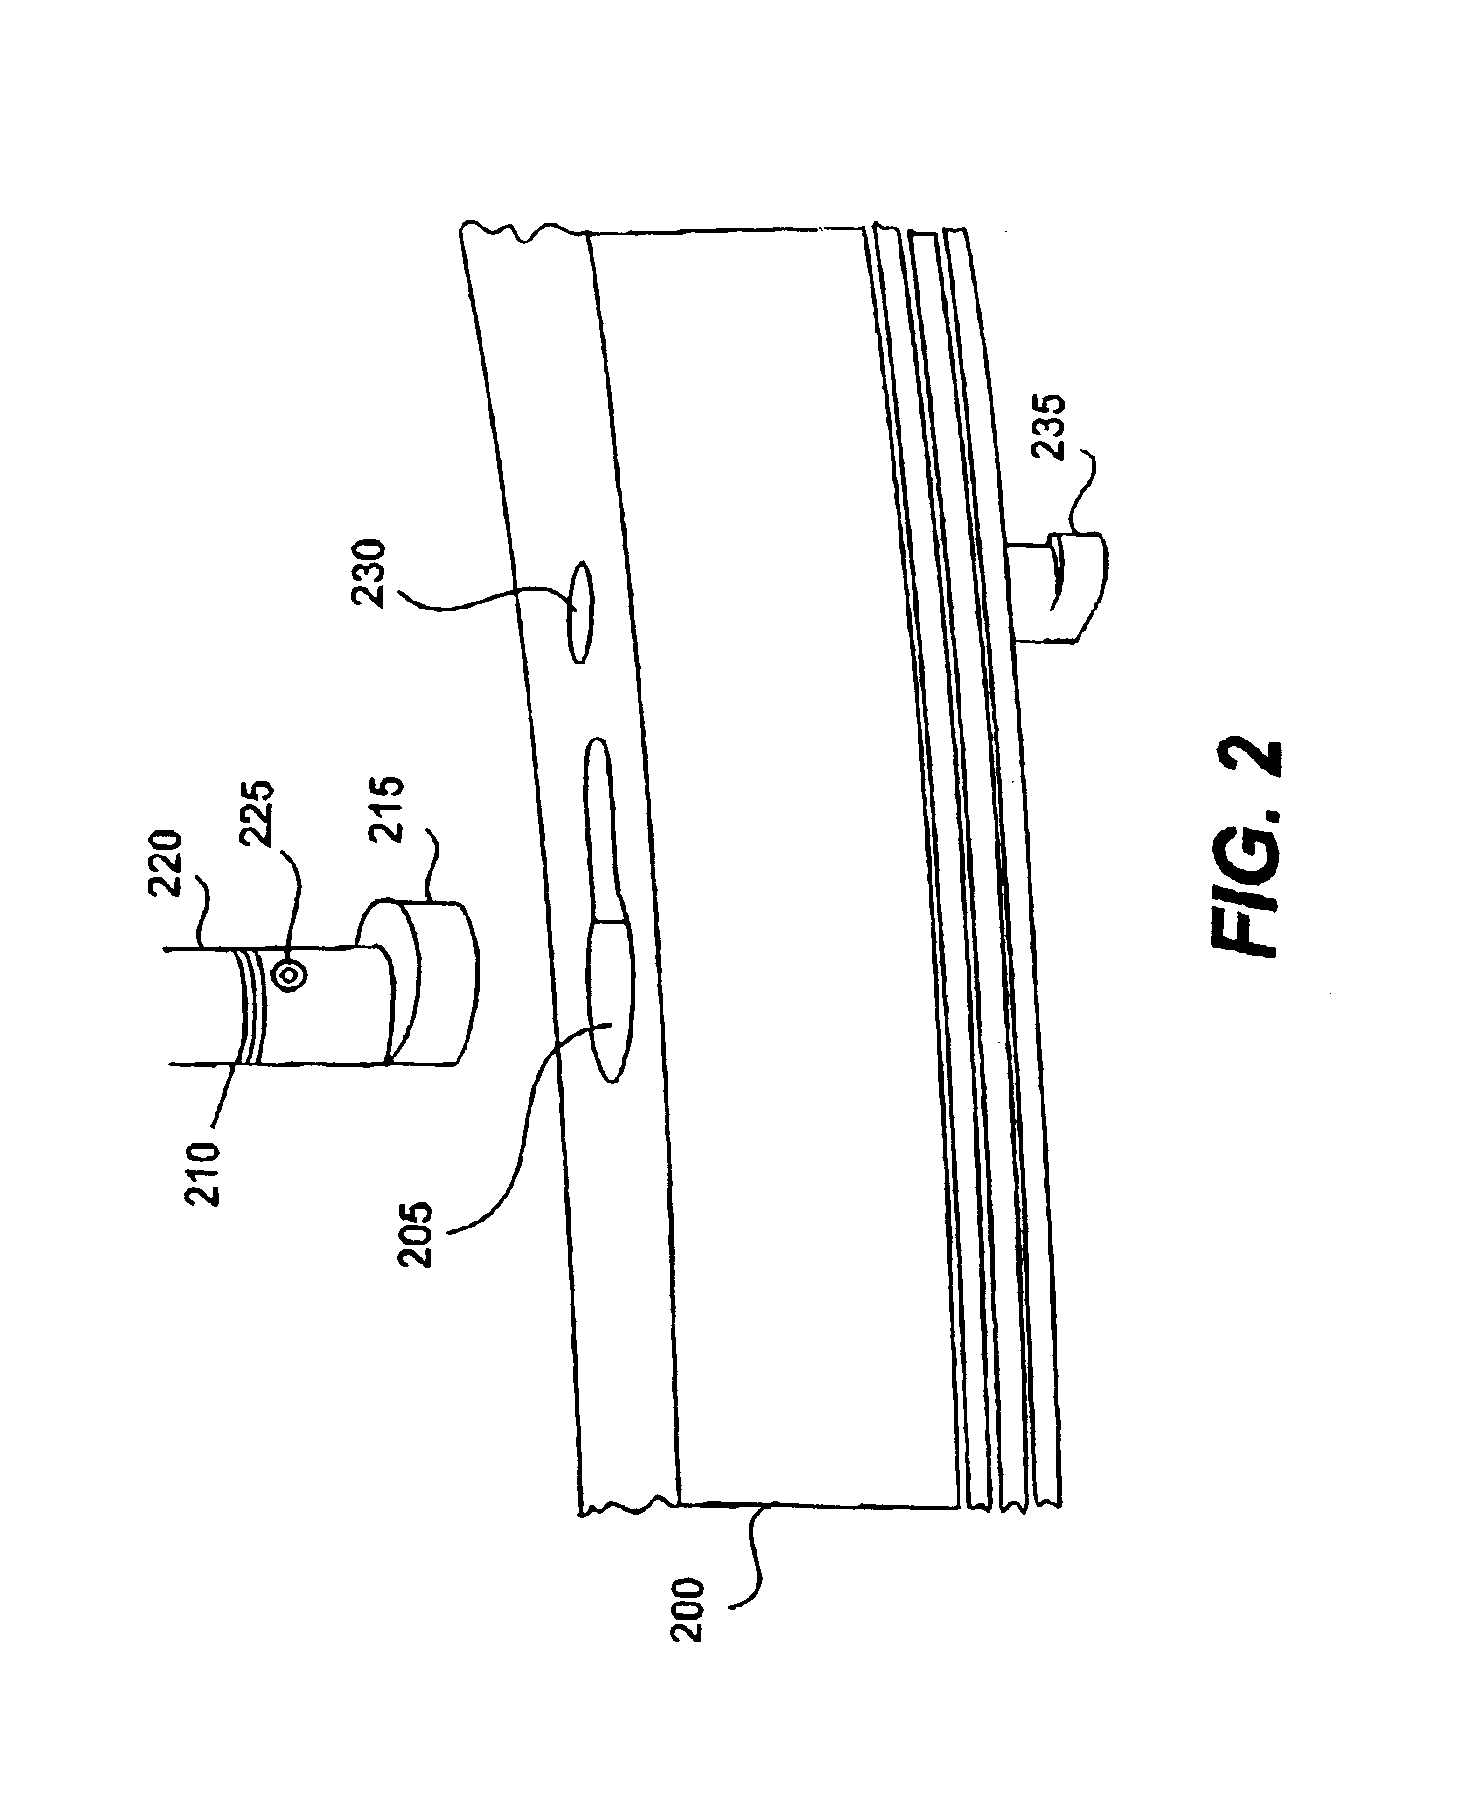 Twist-N-Lock wafer area pressure ring and assembly for reducing particulate contaminant in a plasma processing chamber